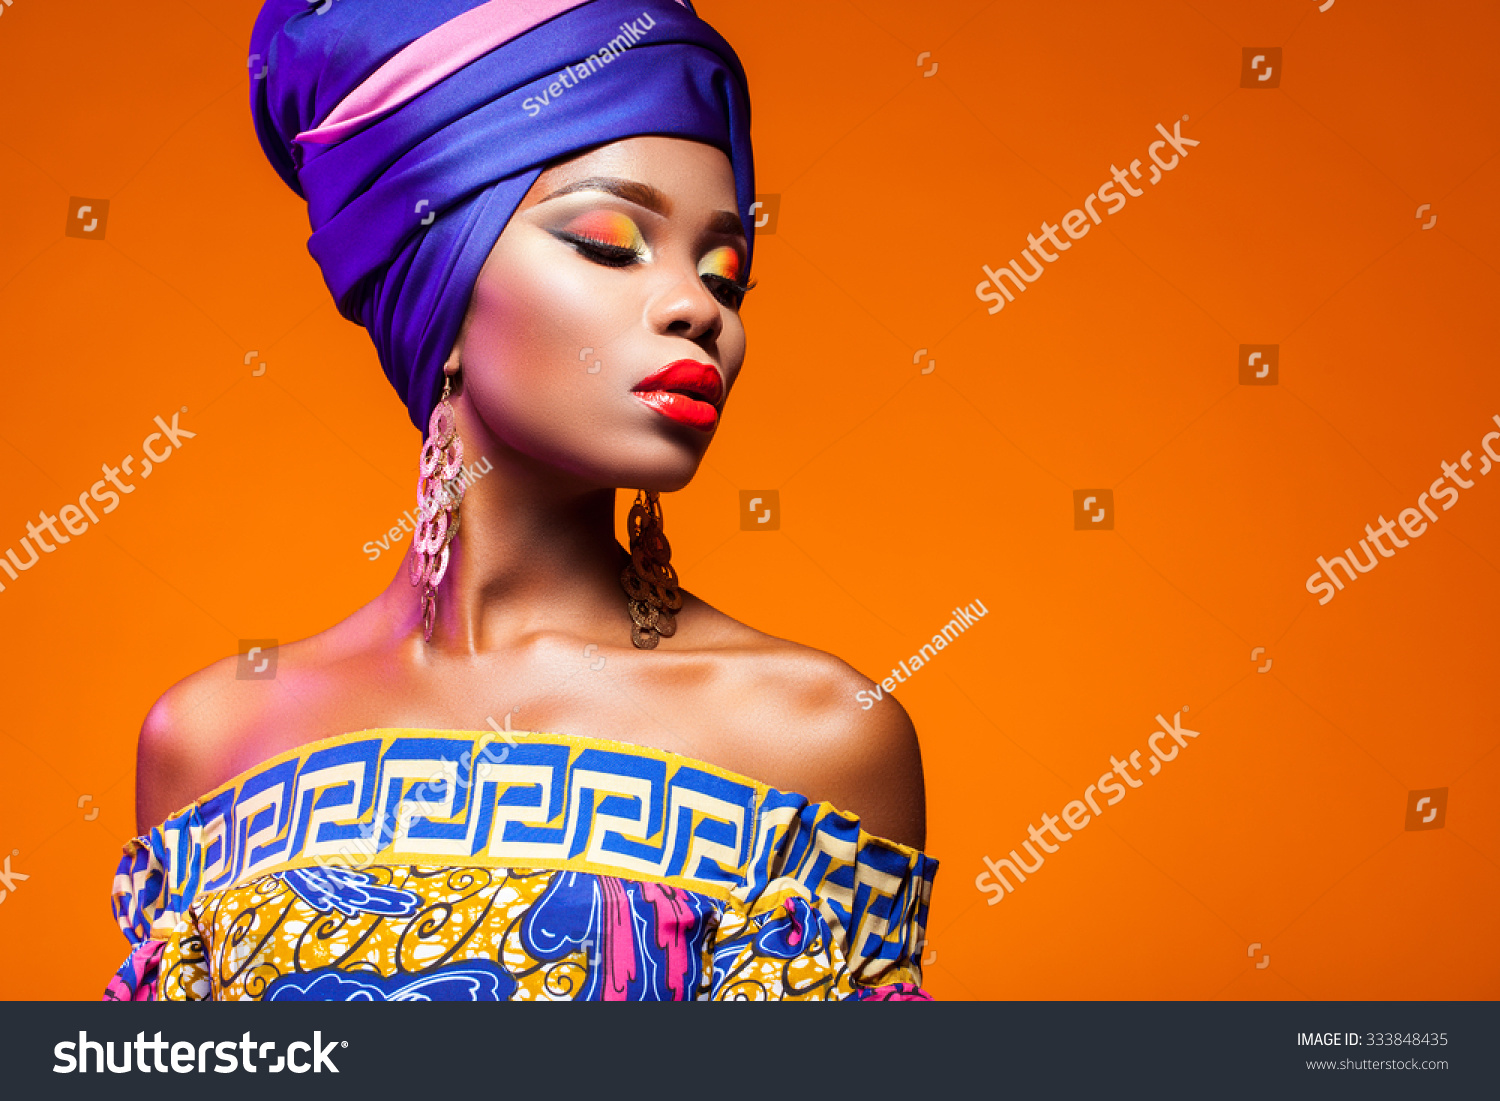 African woman in a bright dress on orange background #333848435